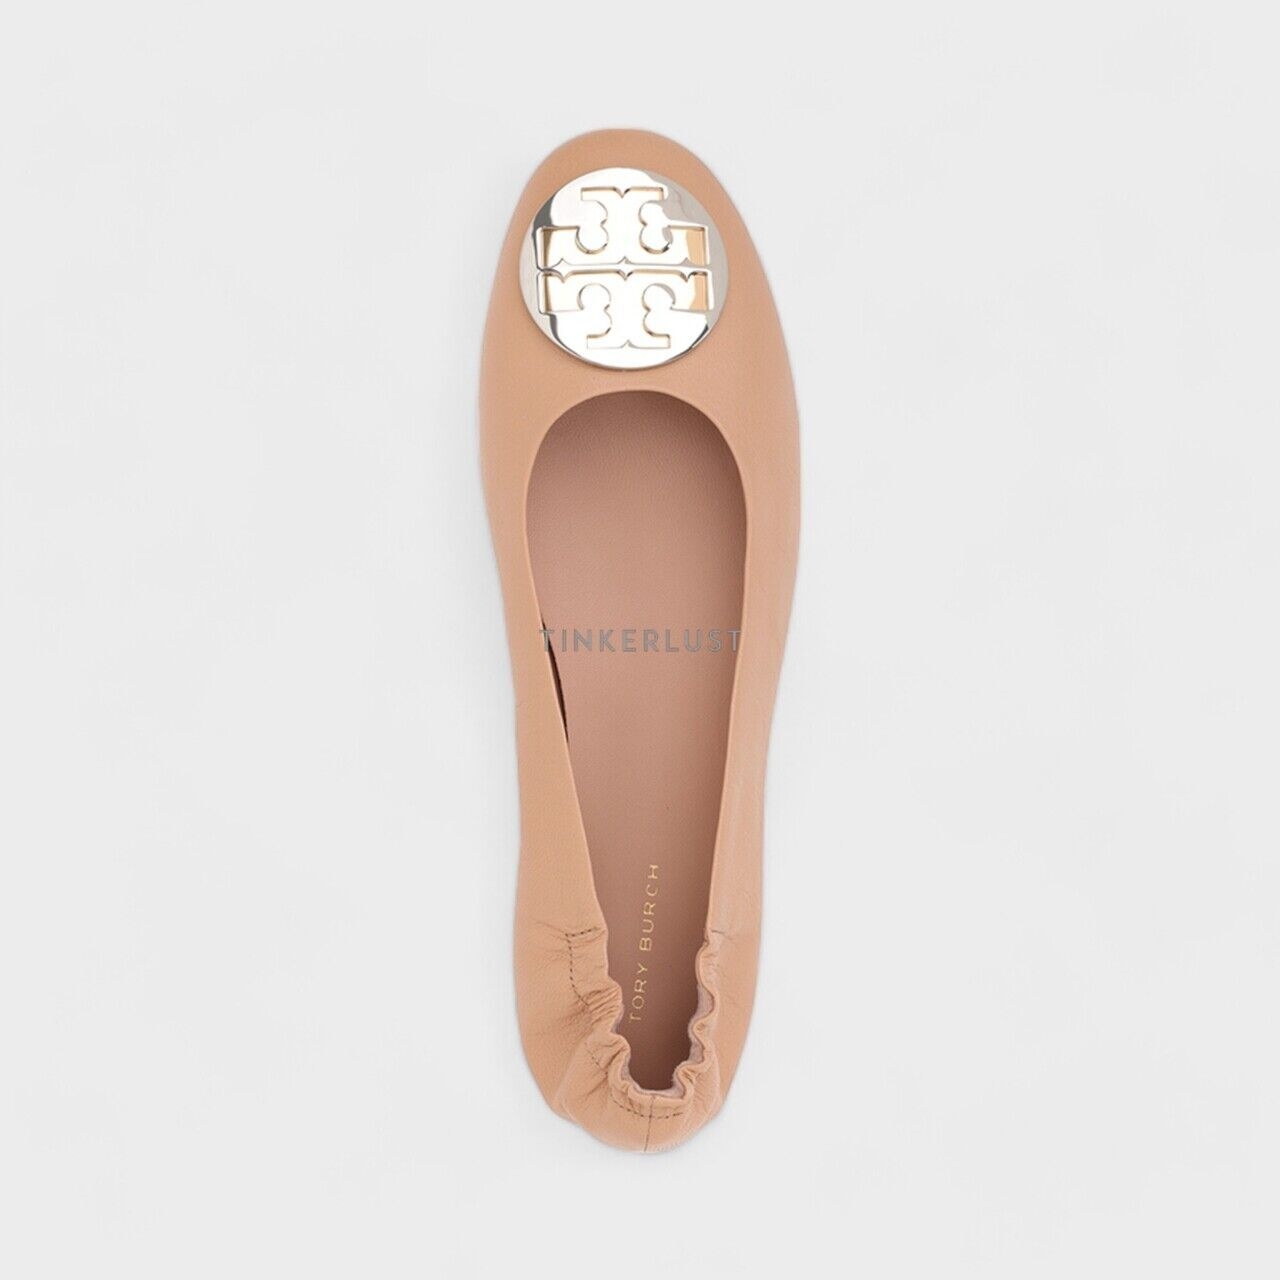 Tory Burch Claire Flat Ballerina in Light Sand 